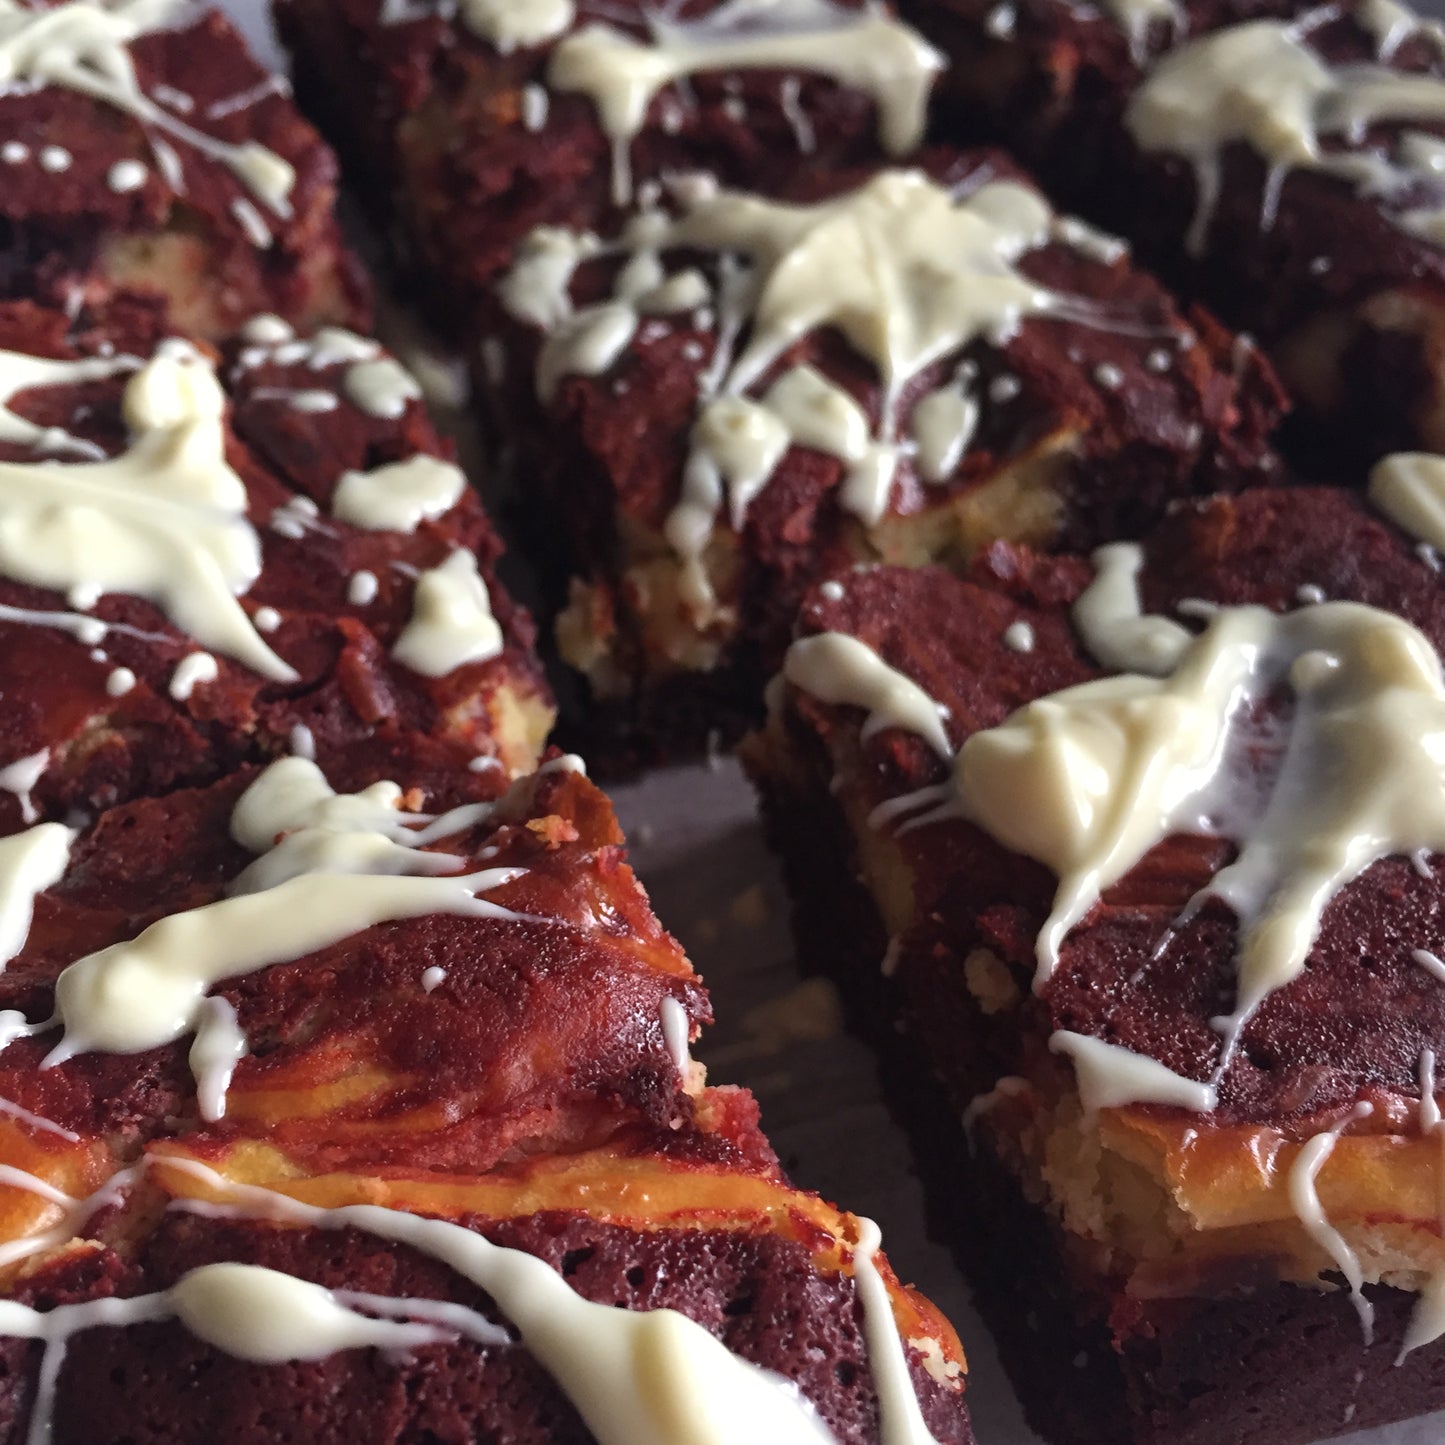 The Red Velvet Cheesecake Brownie